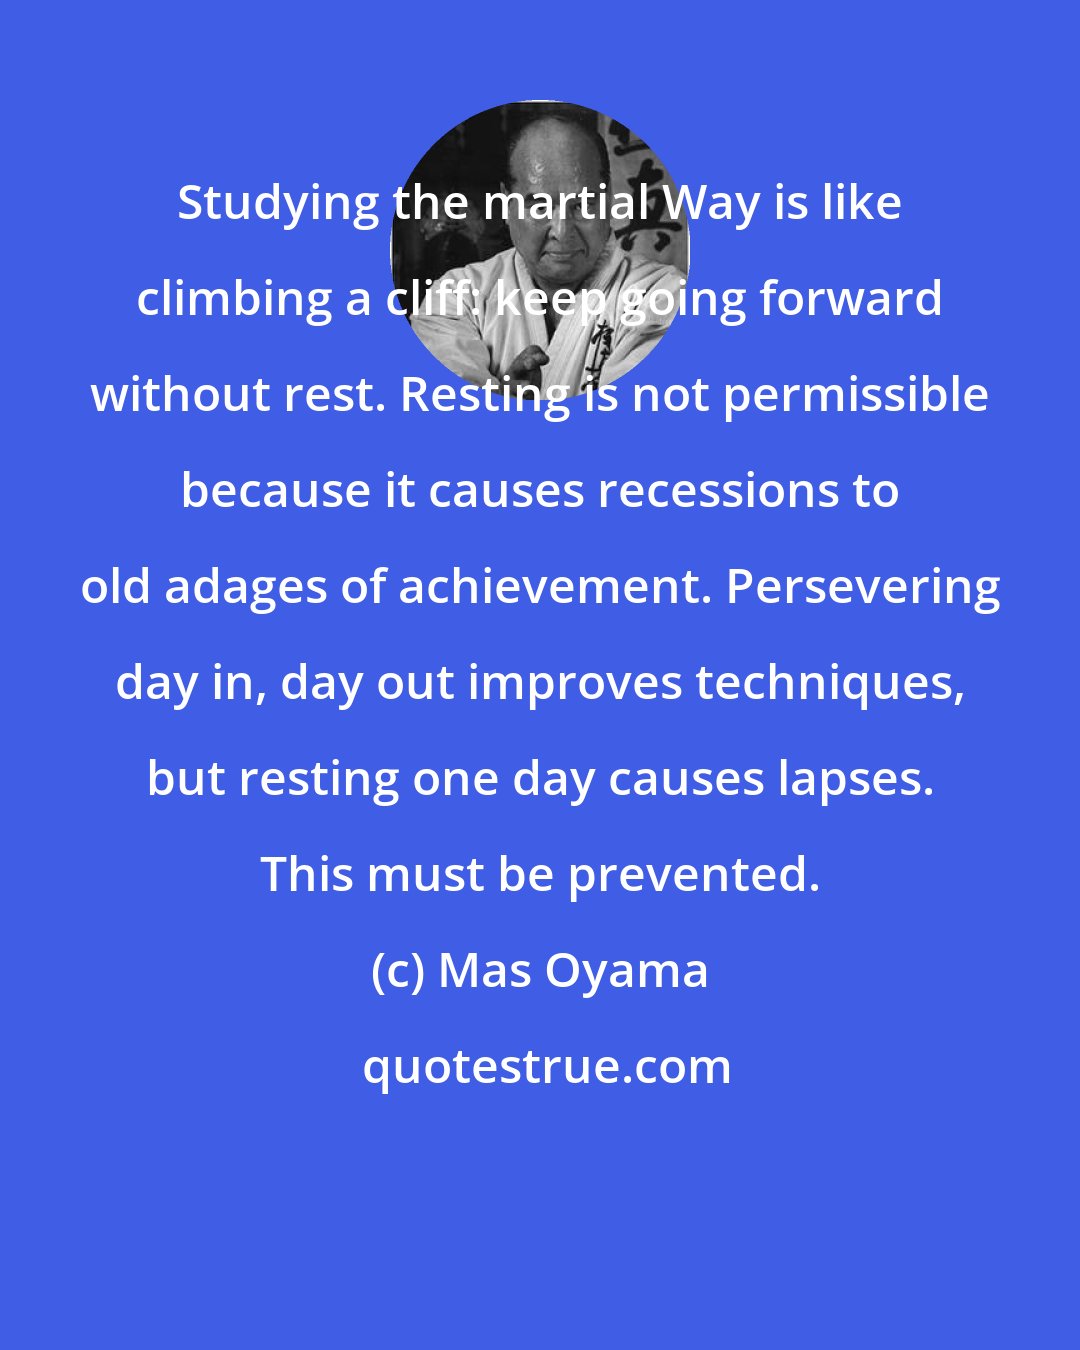 Mas Oyama: Studying the martial Way is like climbing a cliff: keep going forward without rest. Resting is not permissible because it causes recessions to old adages of achievement. Persevering day in, day out improves techniques, but resting one day causes lapses. This must be prevented.